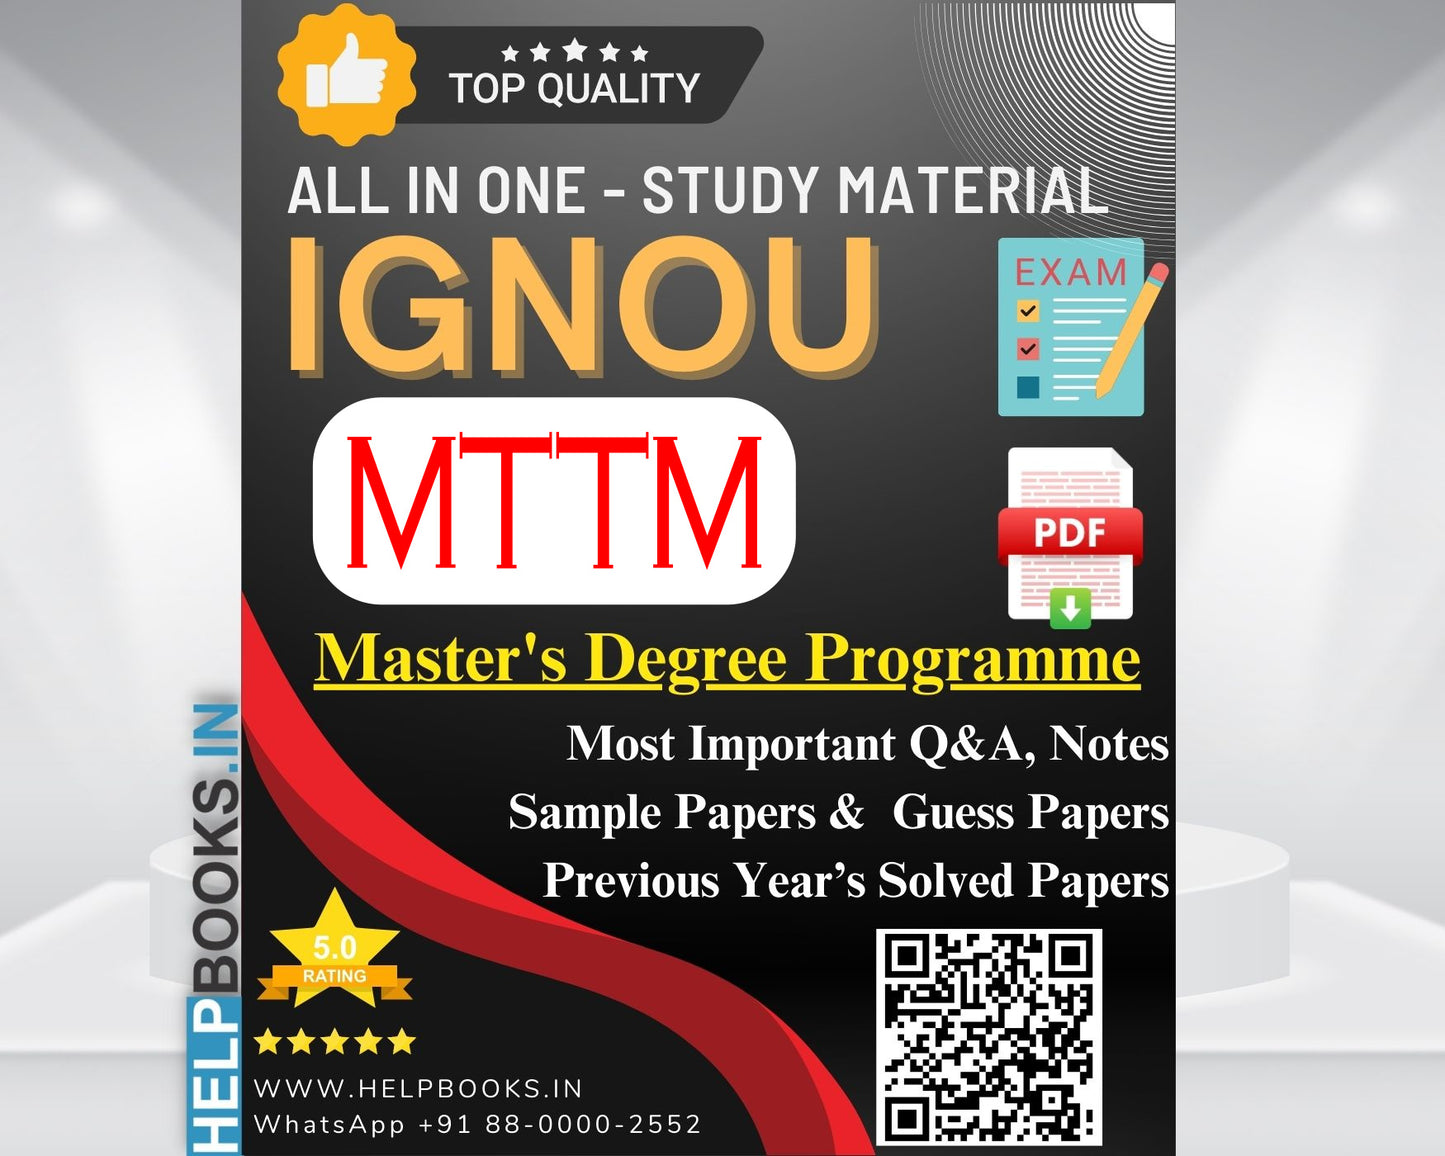 MTTM IGNOU Exam Combo of 10 Solved Papers: 5 Previous Years' Solved Papers & 5 Sample Guess Papers for Master of Tourism and Travel Management